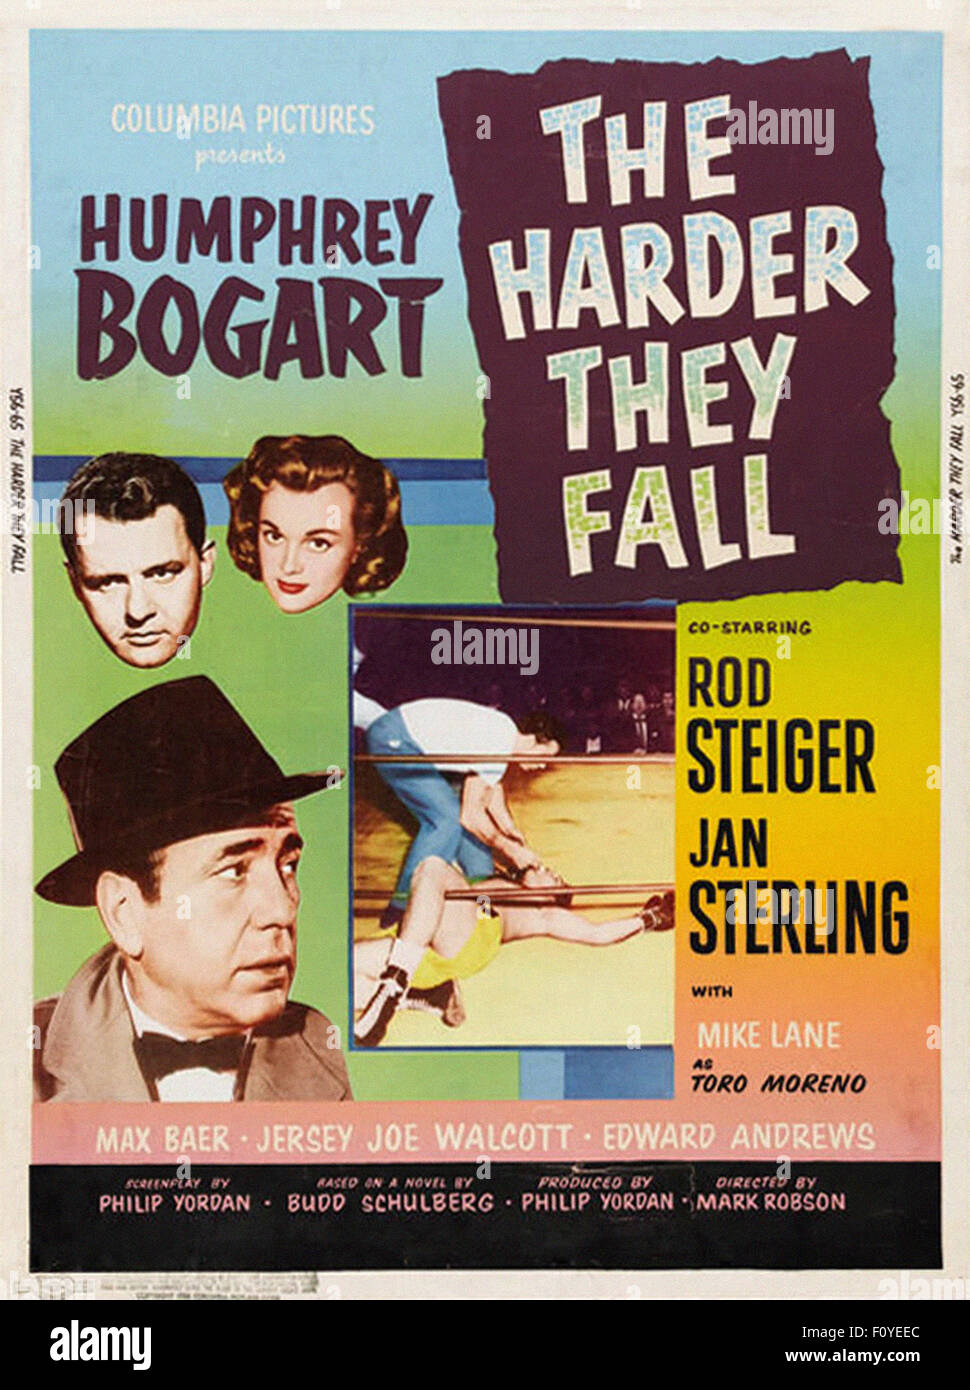 The  Harder they Fall  11 - Movie Poster Stock Photo